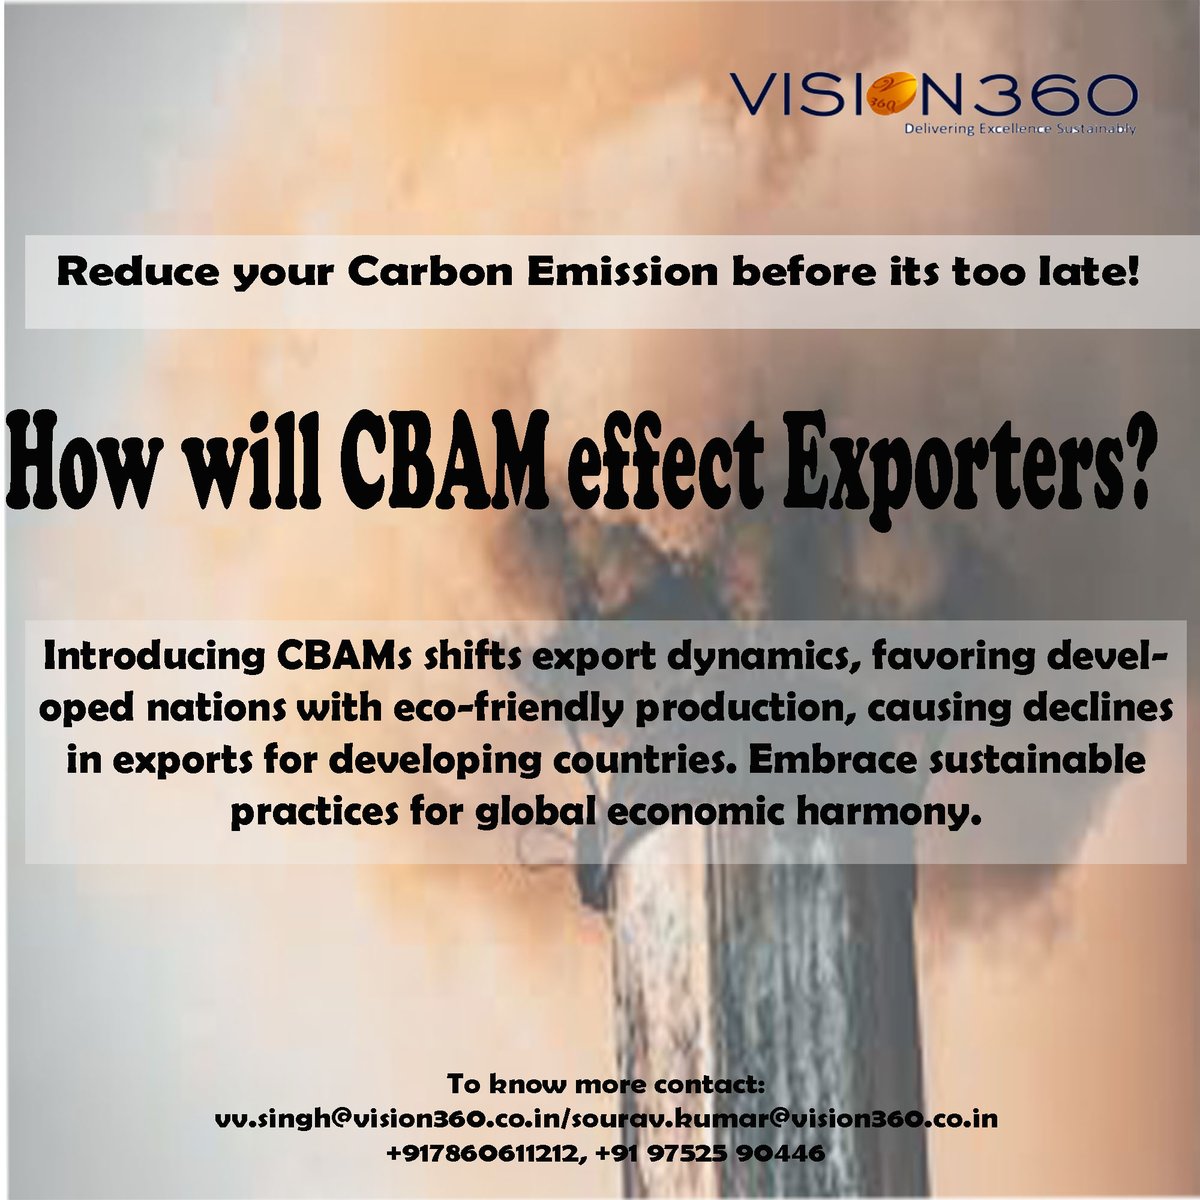 Ensuring Global Sustainability: Embracing CBAM to Curb Carbon Emissions and Safeguard Export Economy. #cement #cementindustry #ironandsteel #ironandsteelindustry #aluminium #aluminiumindustry #fertilizers #fertilizer #electricity #hydrogen #carbonfootprint #carbon #cbam